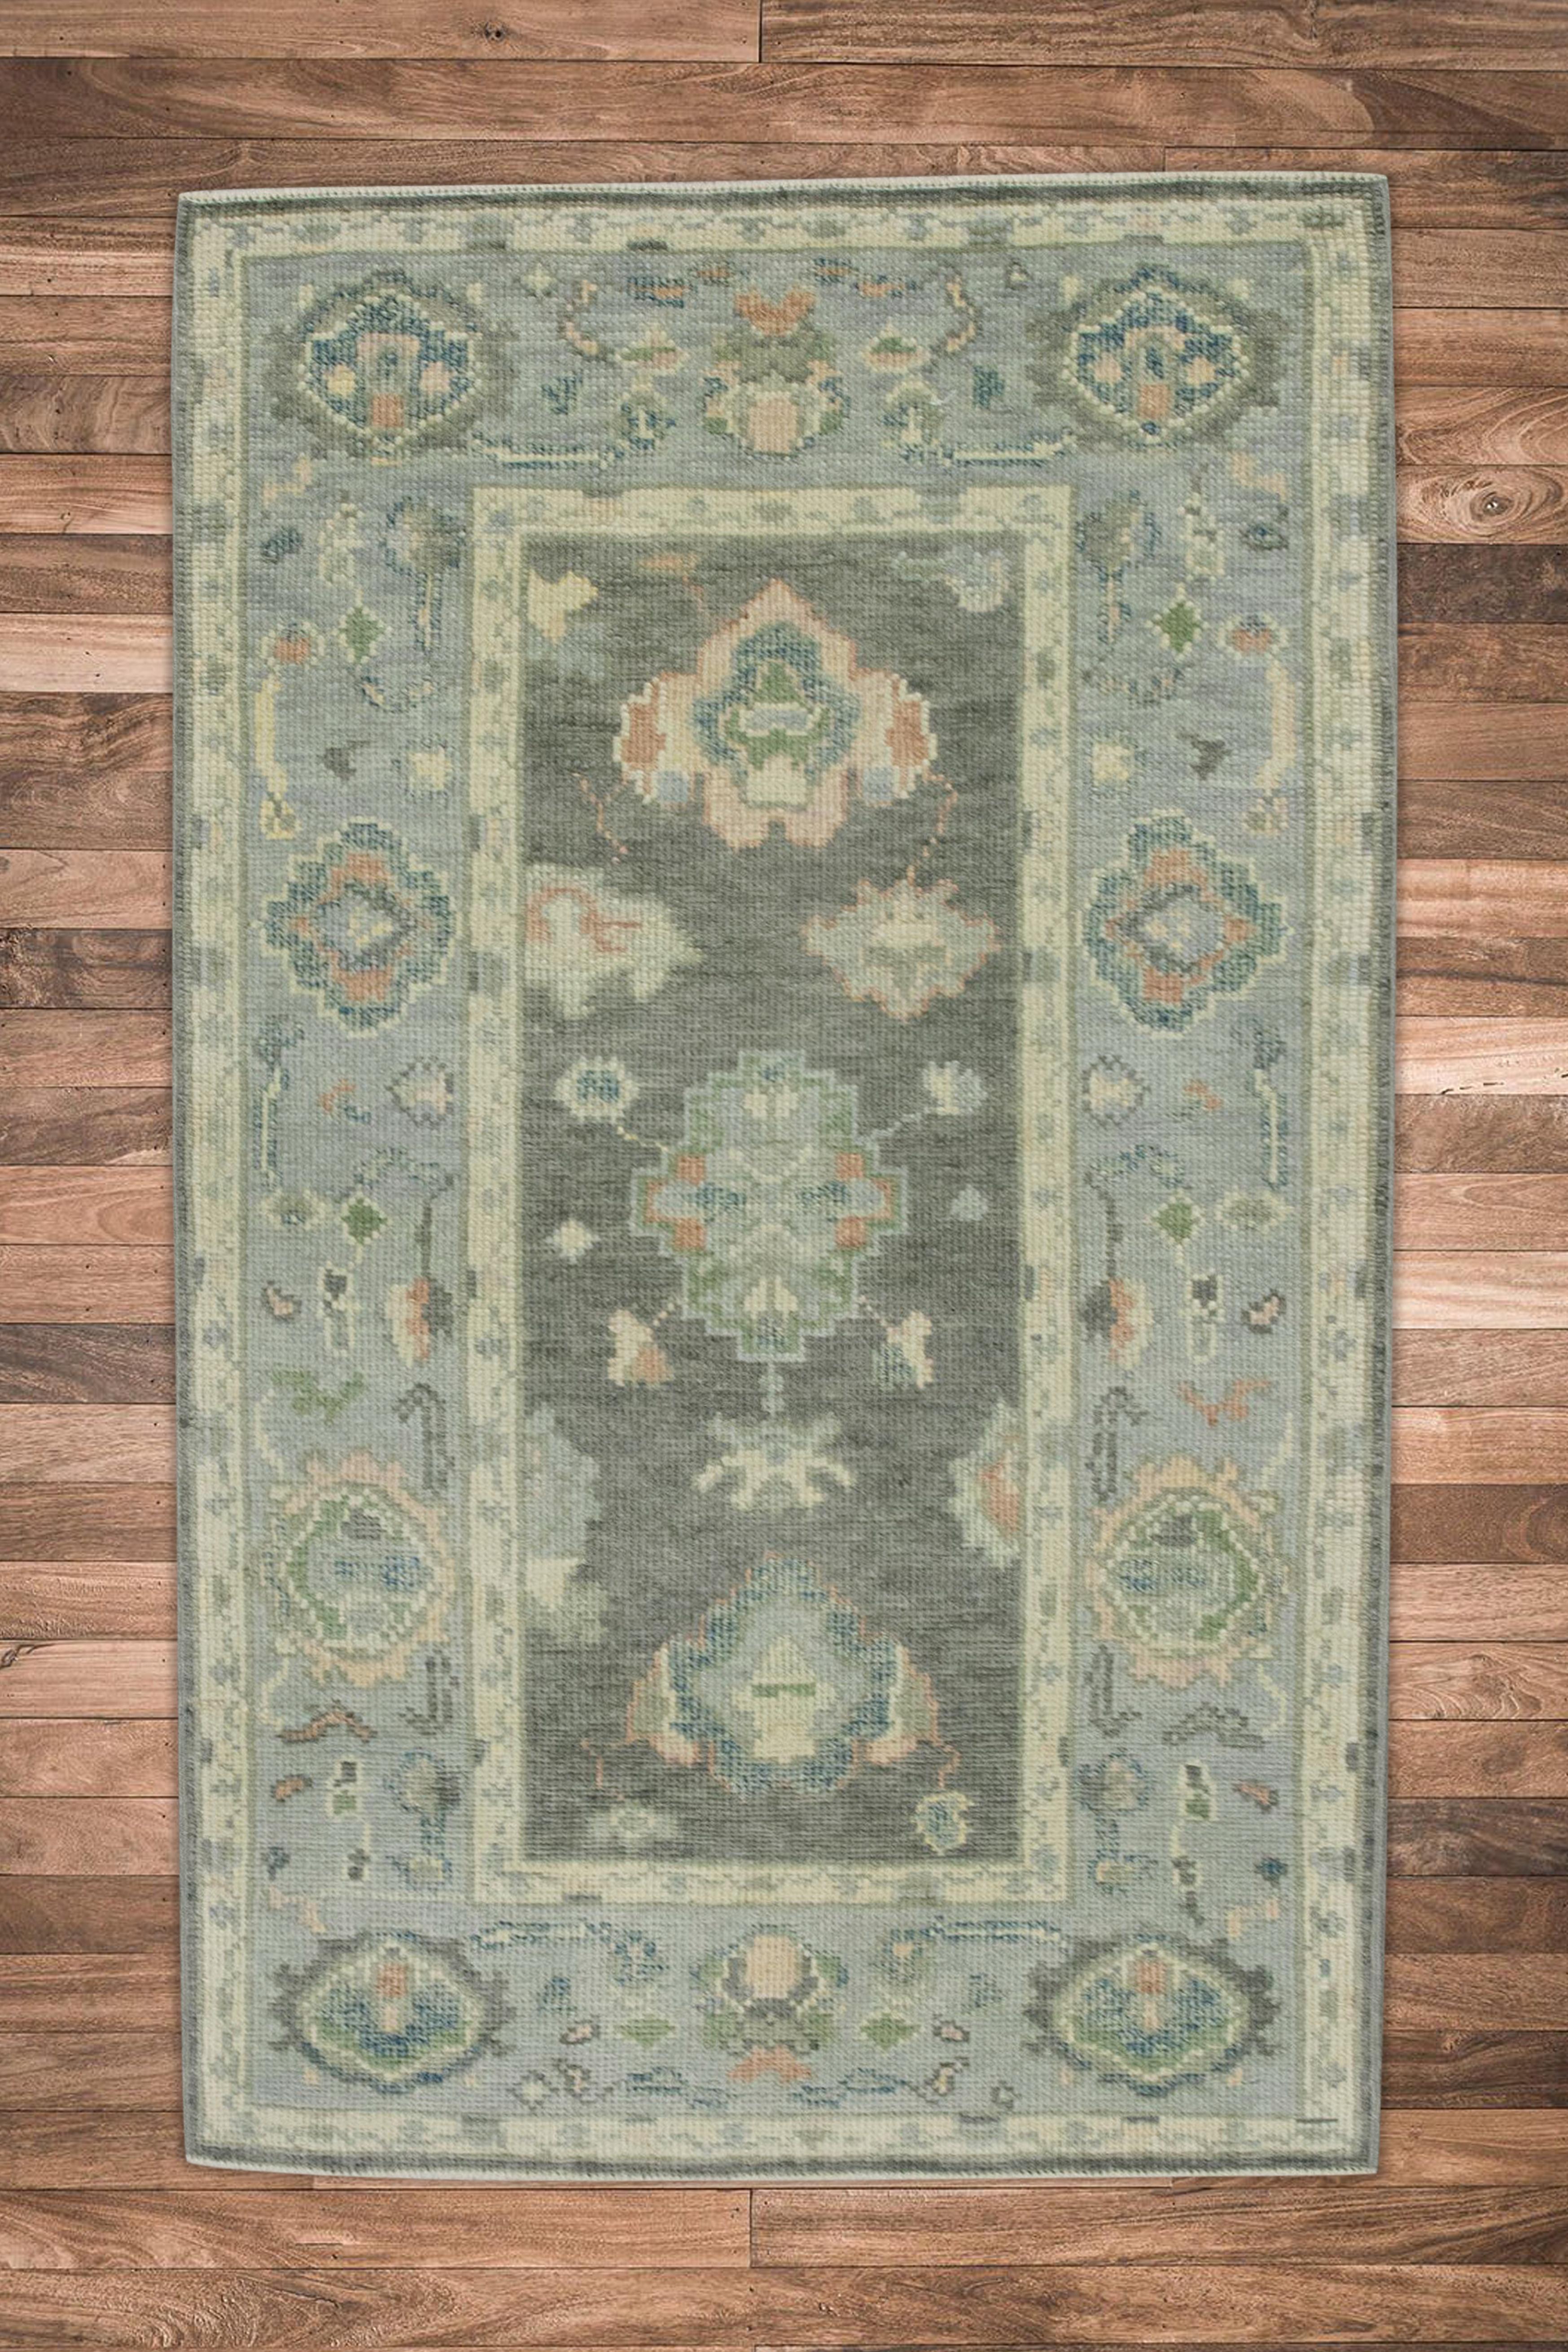 Contemporary Gray & Blue Floral Design Handwoven Wool Turkish Oushak Rug 3' x 4'10